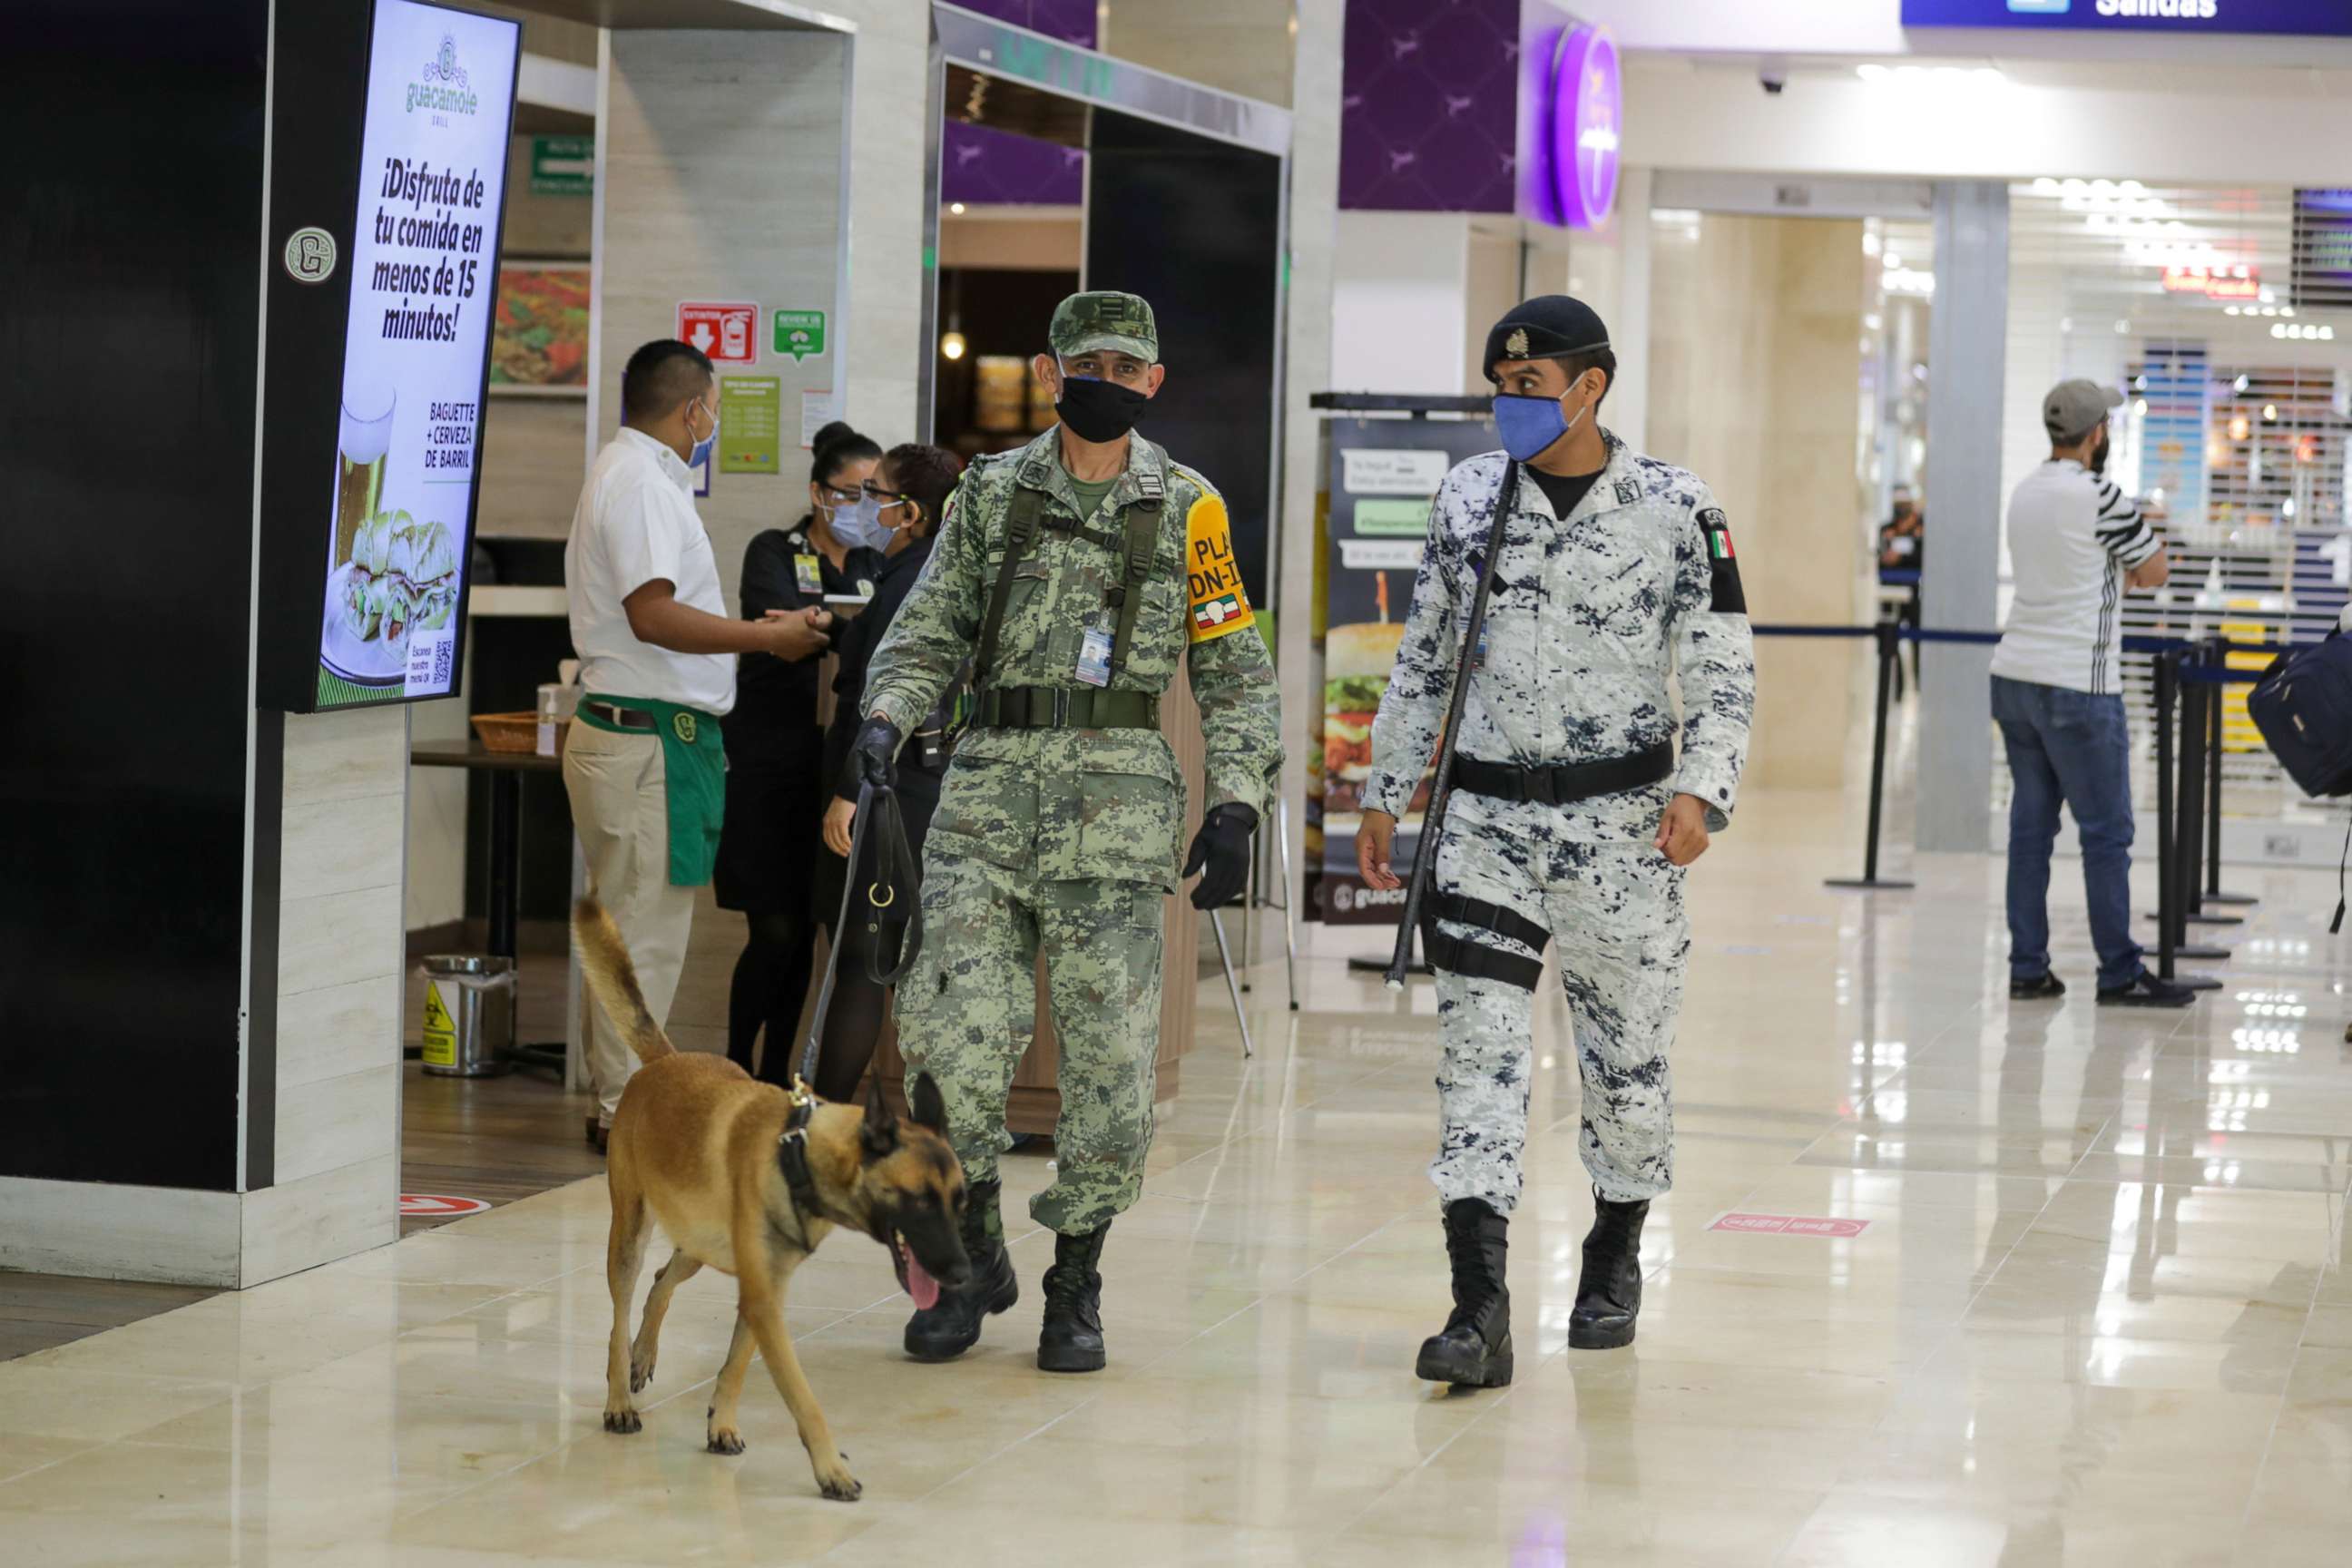 PHOTO: Members of the military make sure passengers are following the COVID-19 rules at Cancun International Airport on Nov. 19, 2020 in Cancun, Mexico.